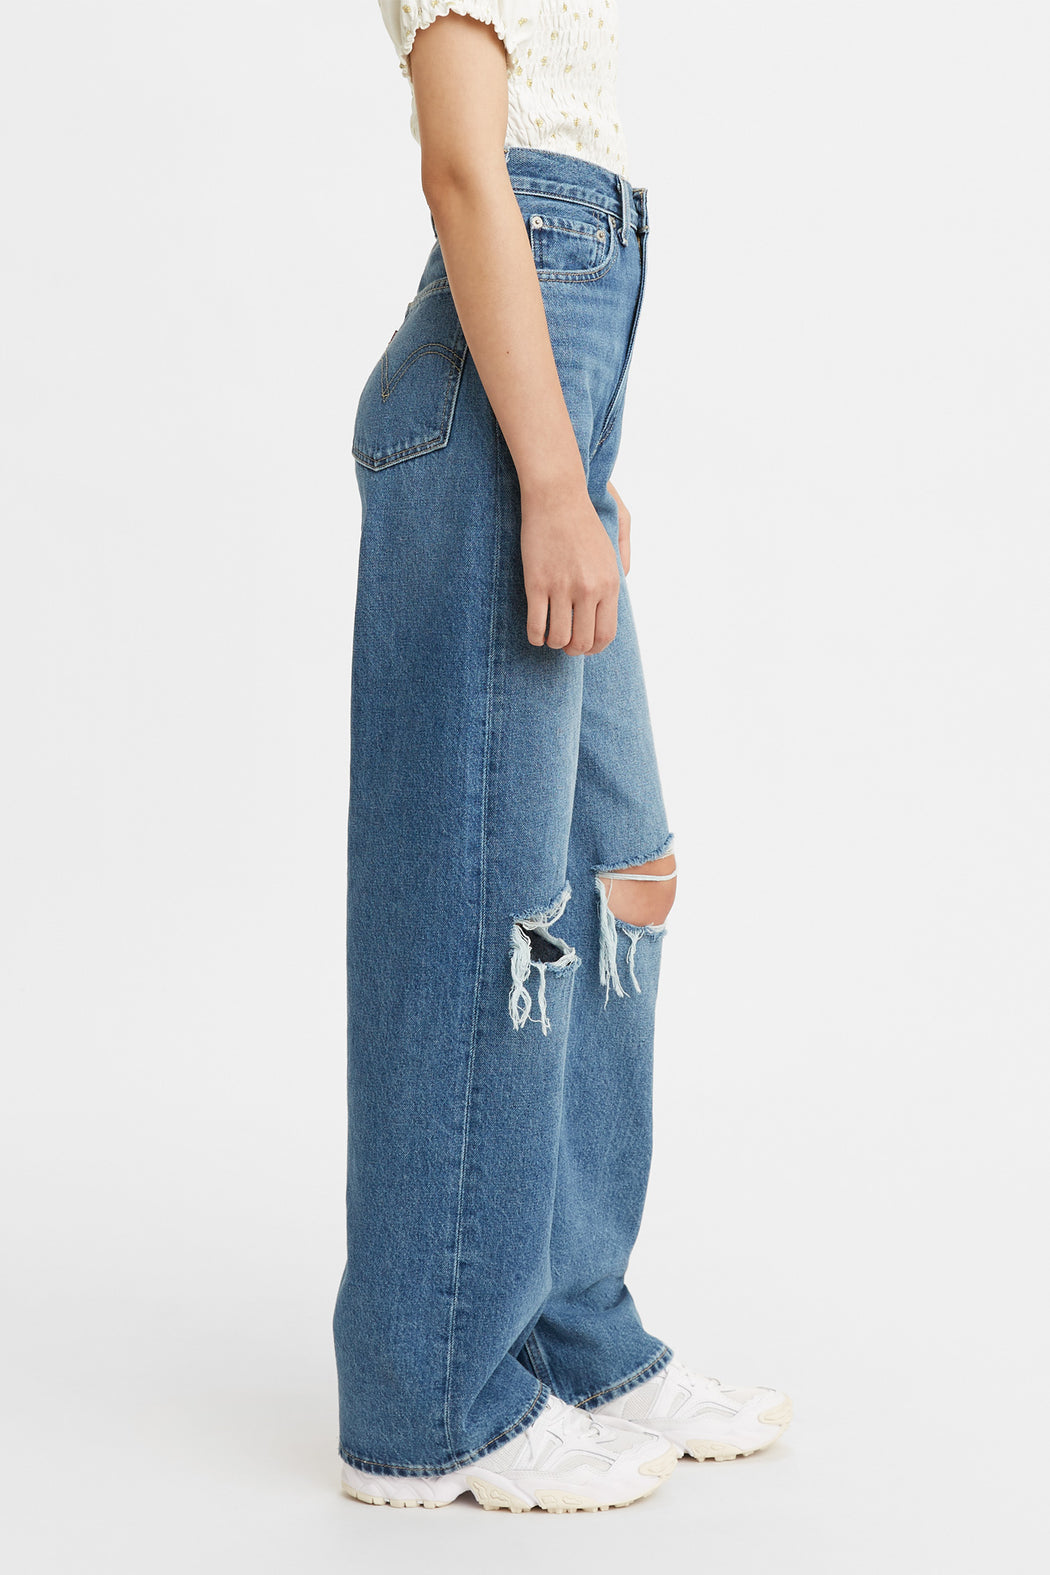 Levis-High-Loose-Jeans-Max-Out